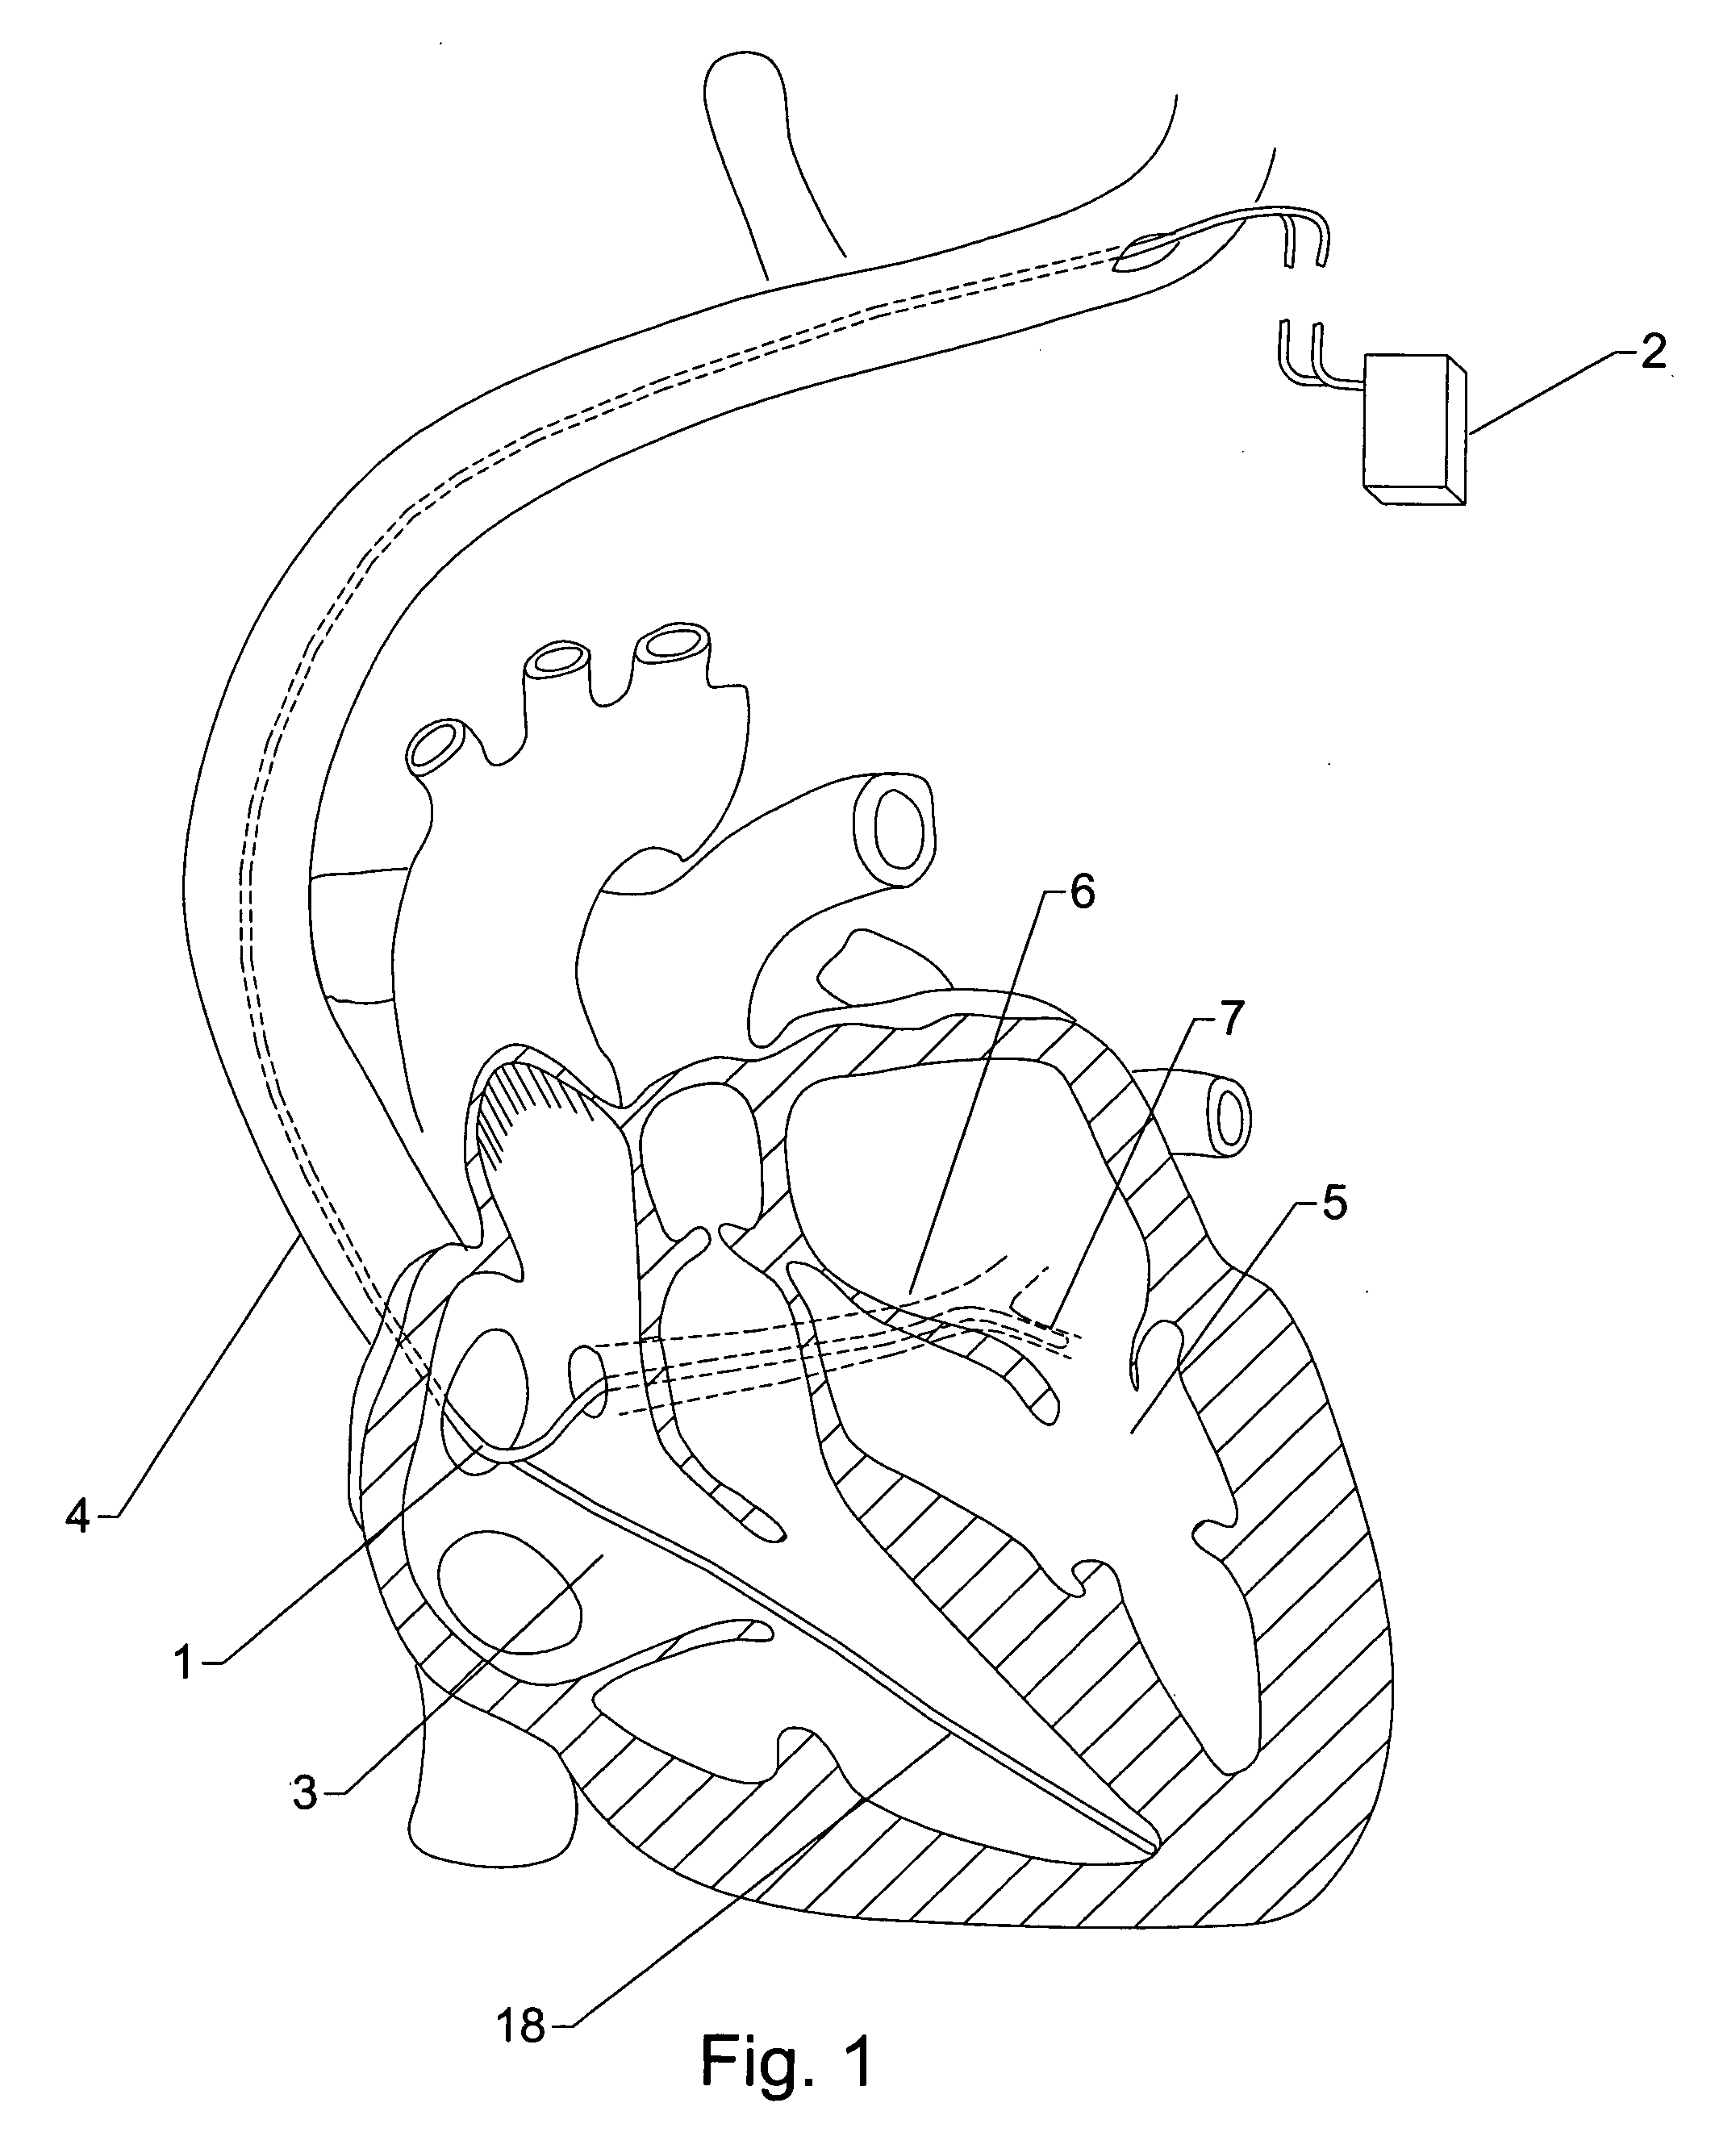 Method and apparatus for adjusting interventricular delay based on ventricular pressure